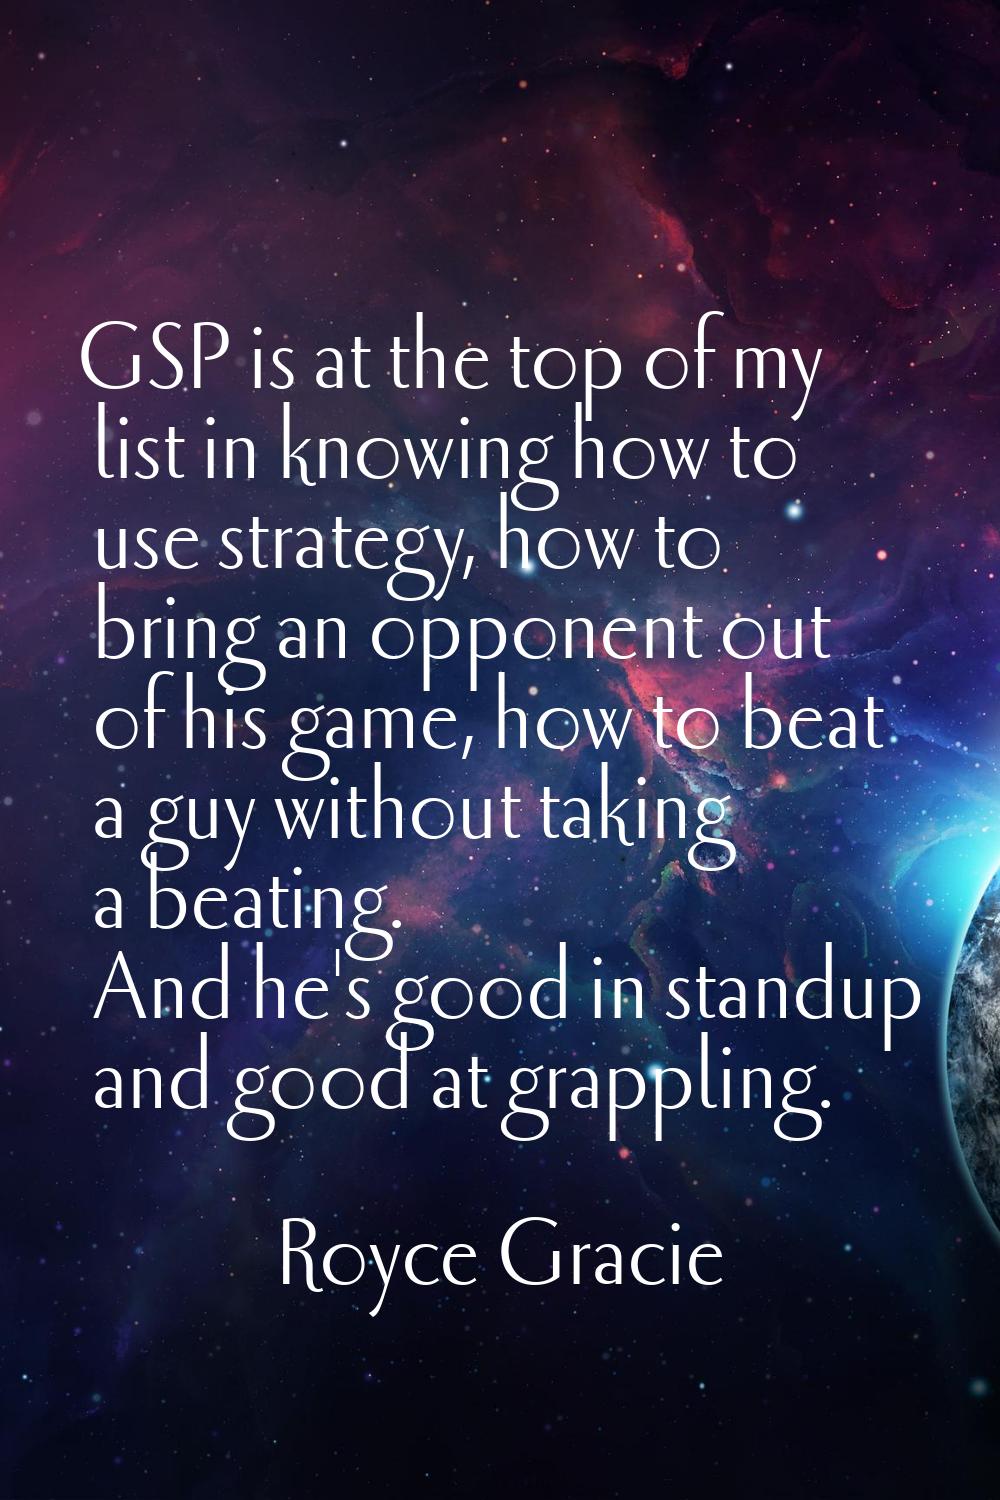 GSP is at the top of my list in knowing how to use strategy, how to bring an opponent out of his ga